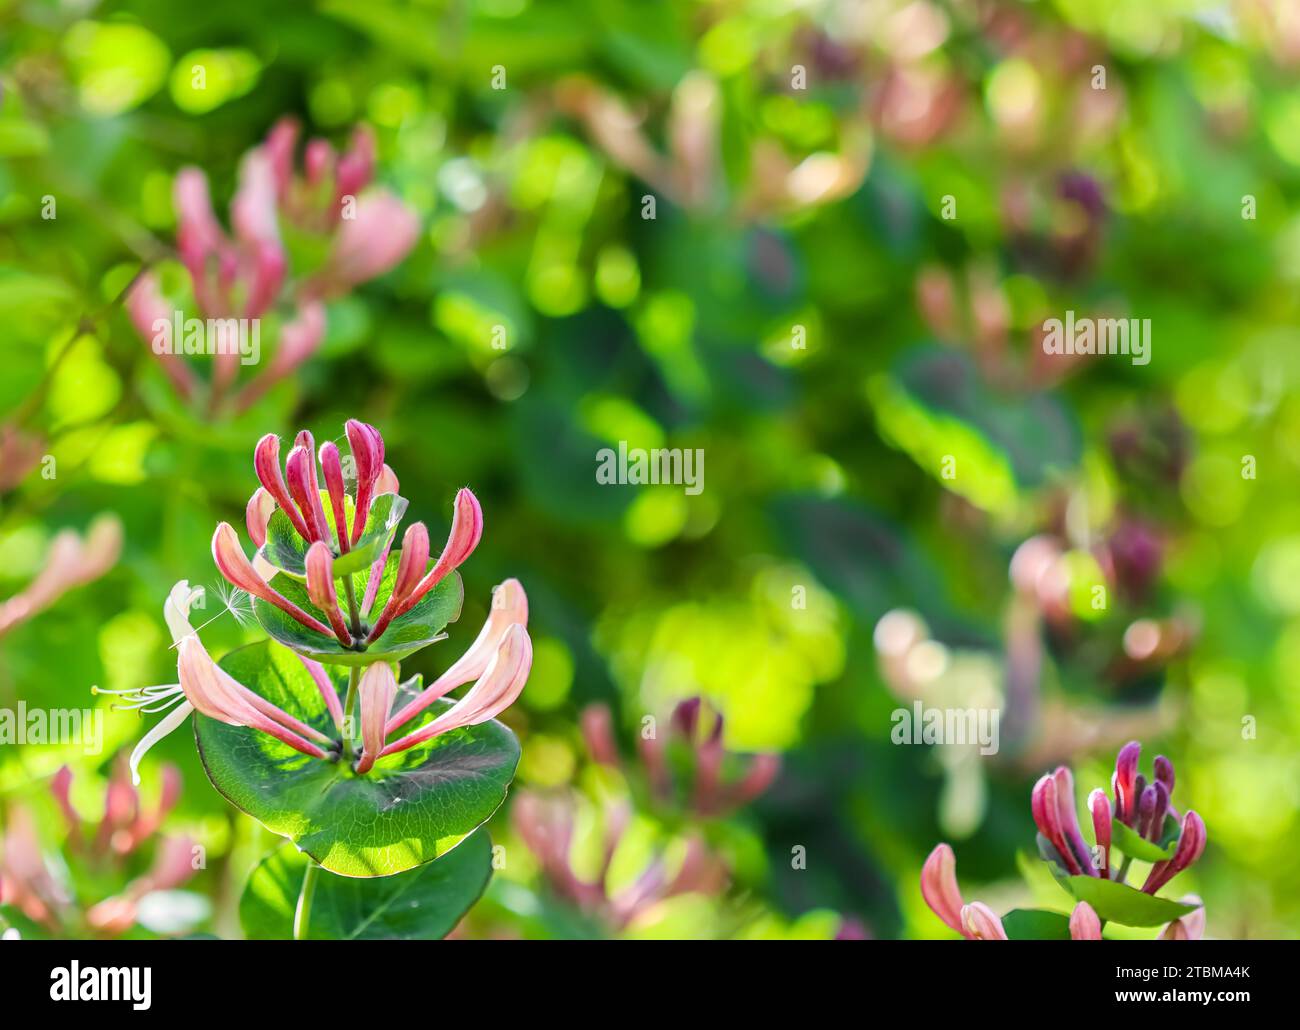 Pink Honeysuckle (Lonicera) buds and flowers in a sunny garden. Etrusca Santi caprifolium, woodbine in bloom. Gardening concept. Floral background Stock Photo